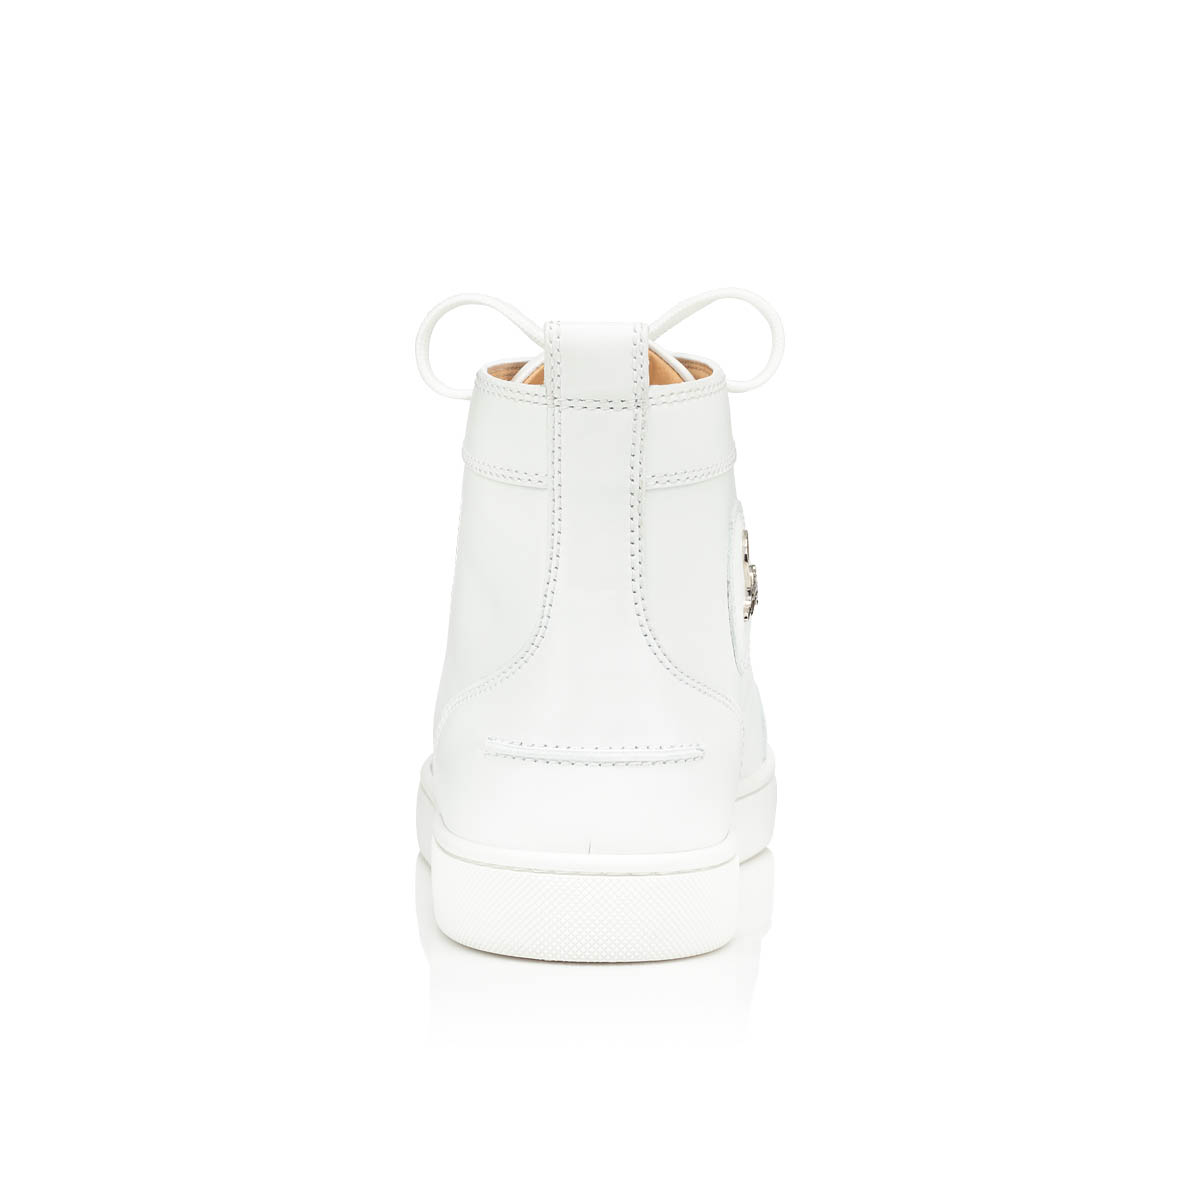 Christian louboutin full white plain leather man sneakers high tops shoes